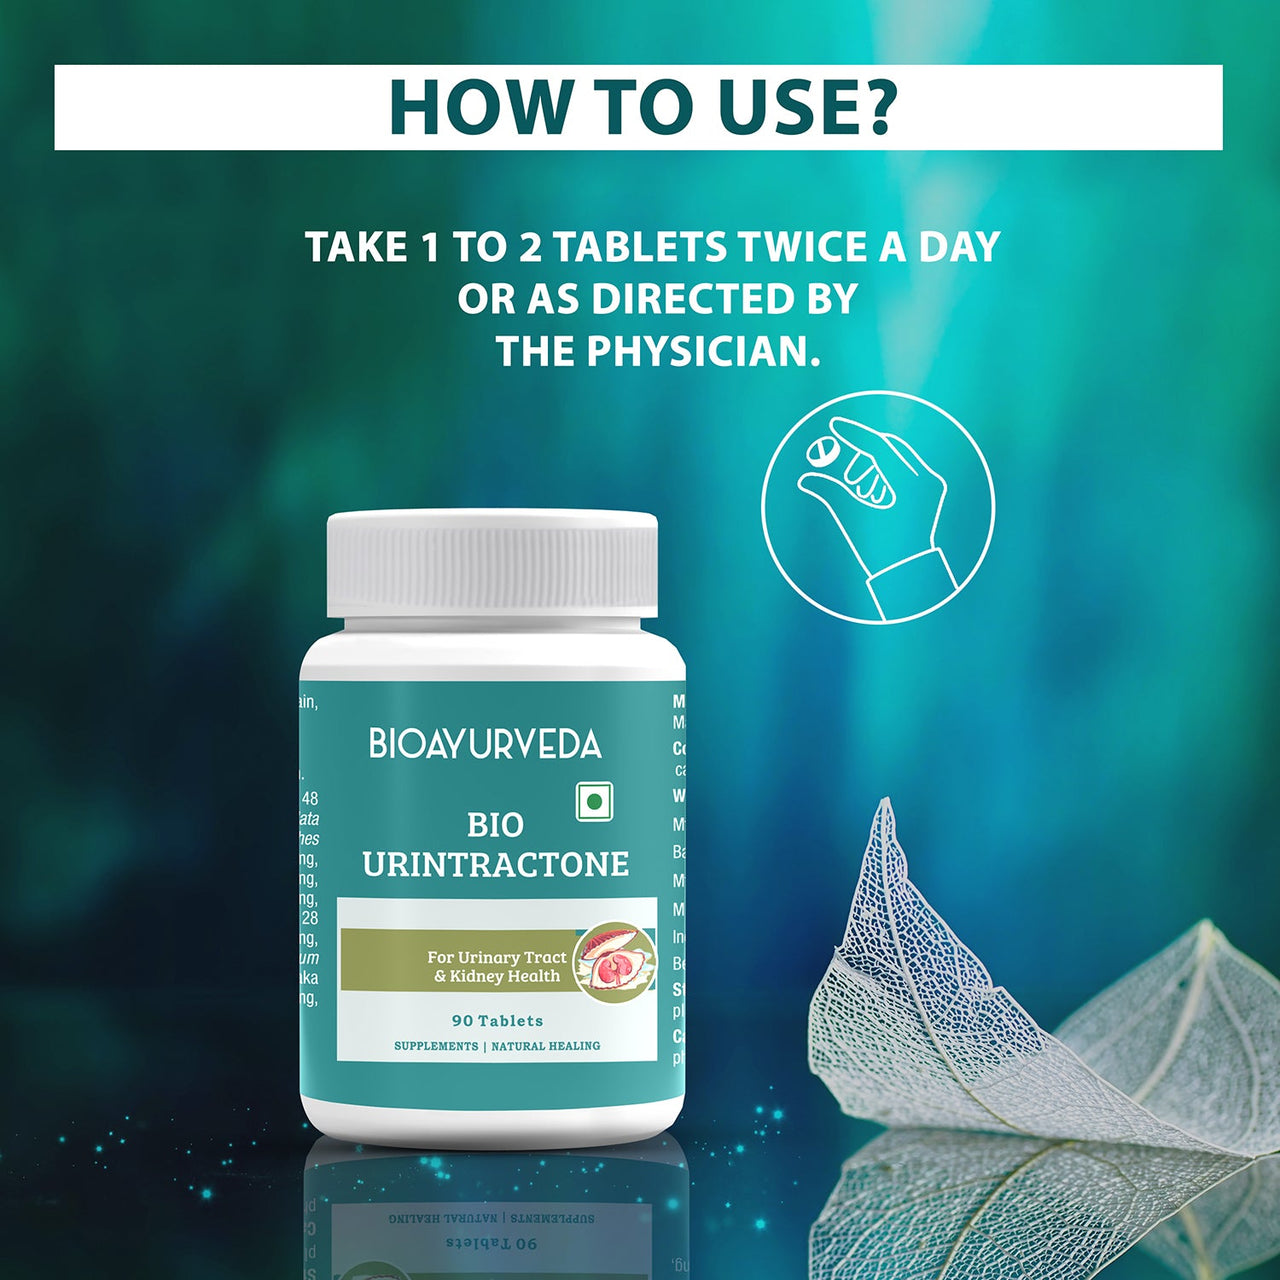 How to Use Urintractone Tablet